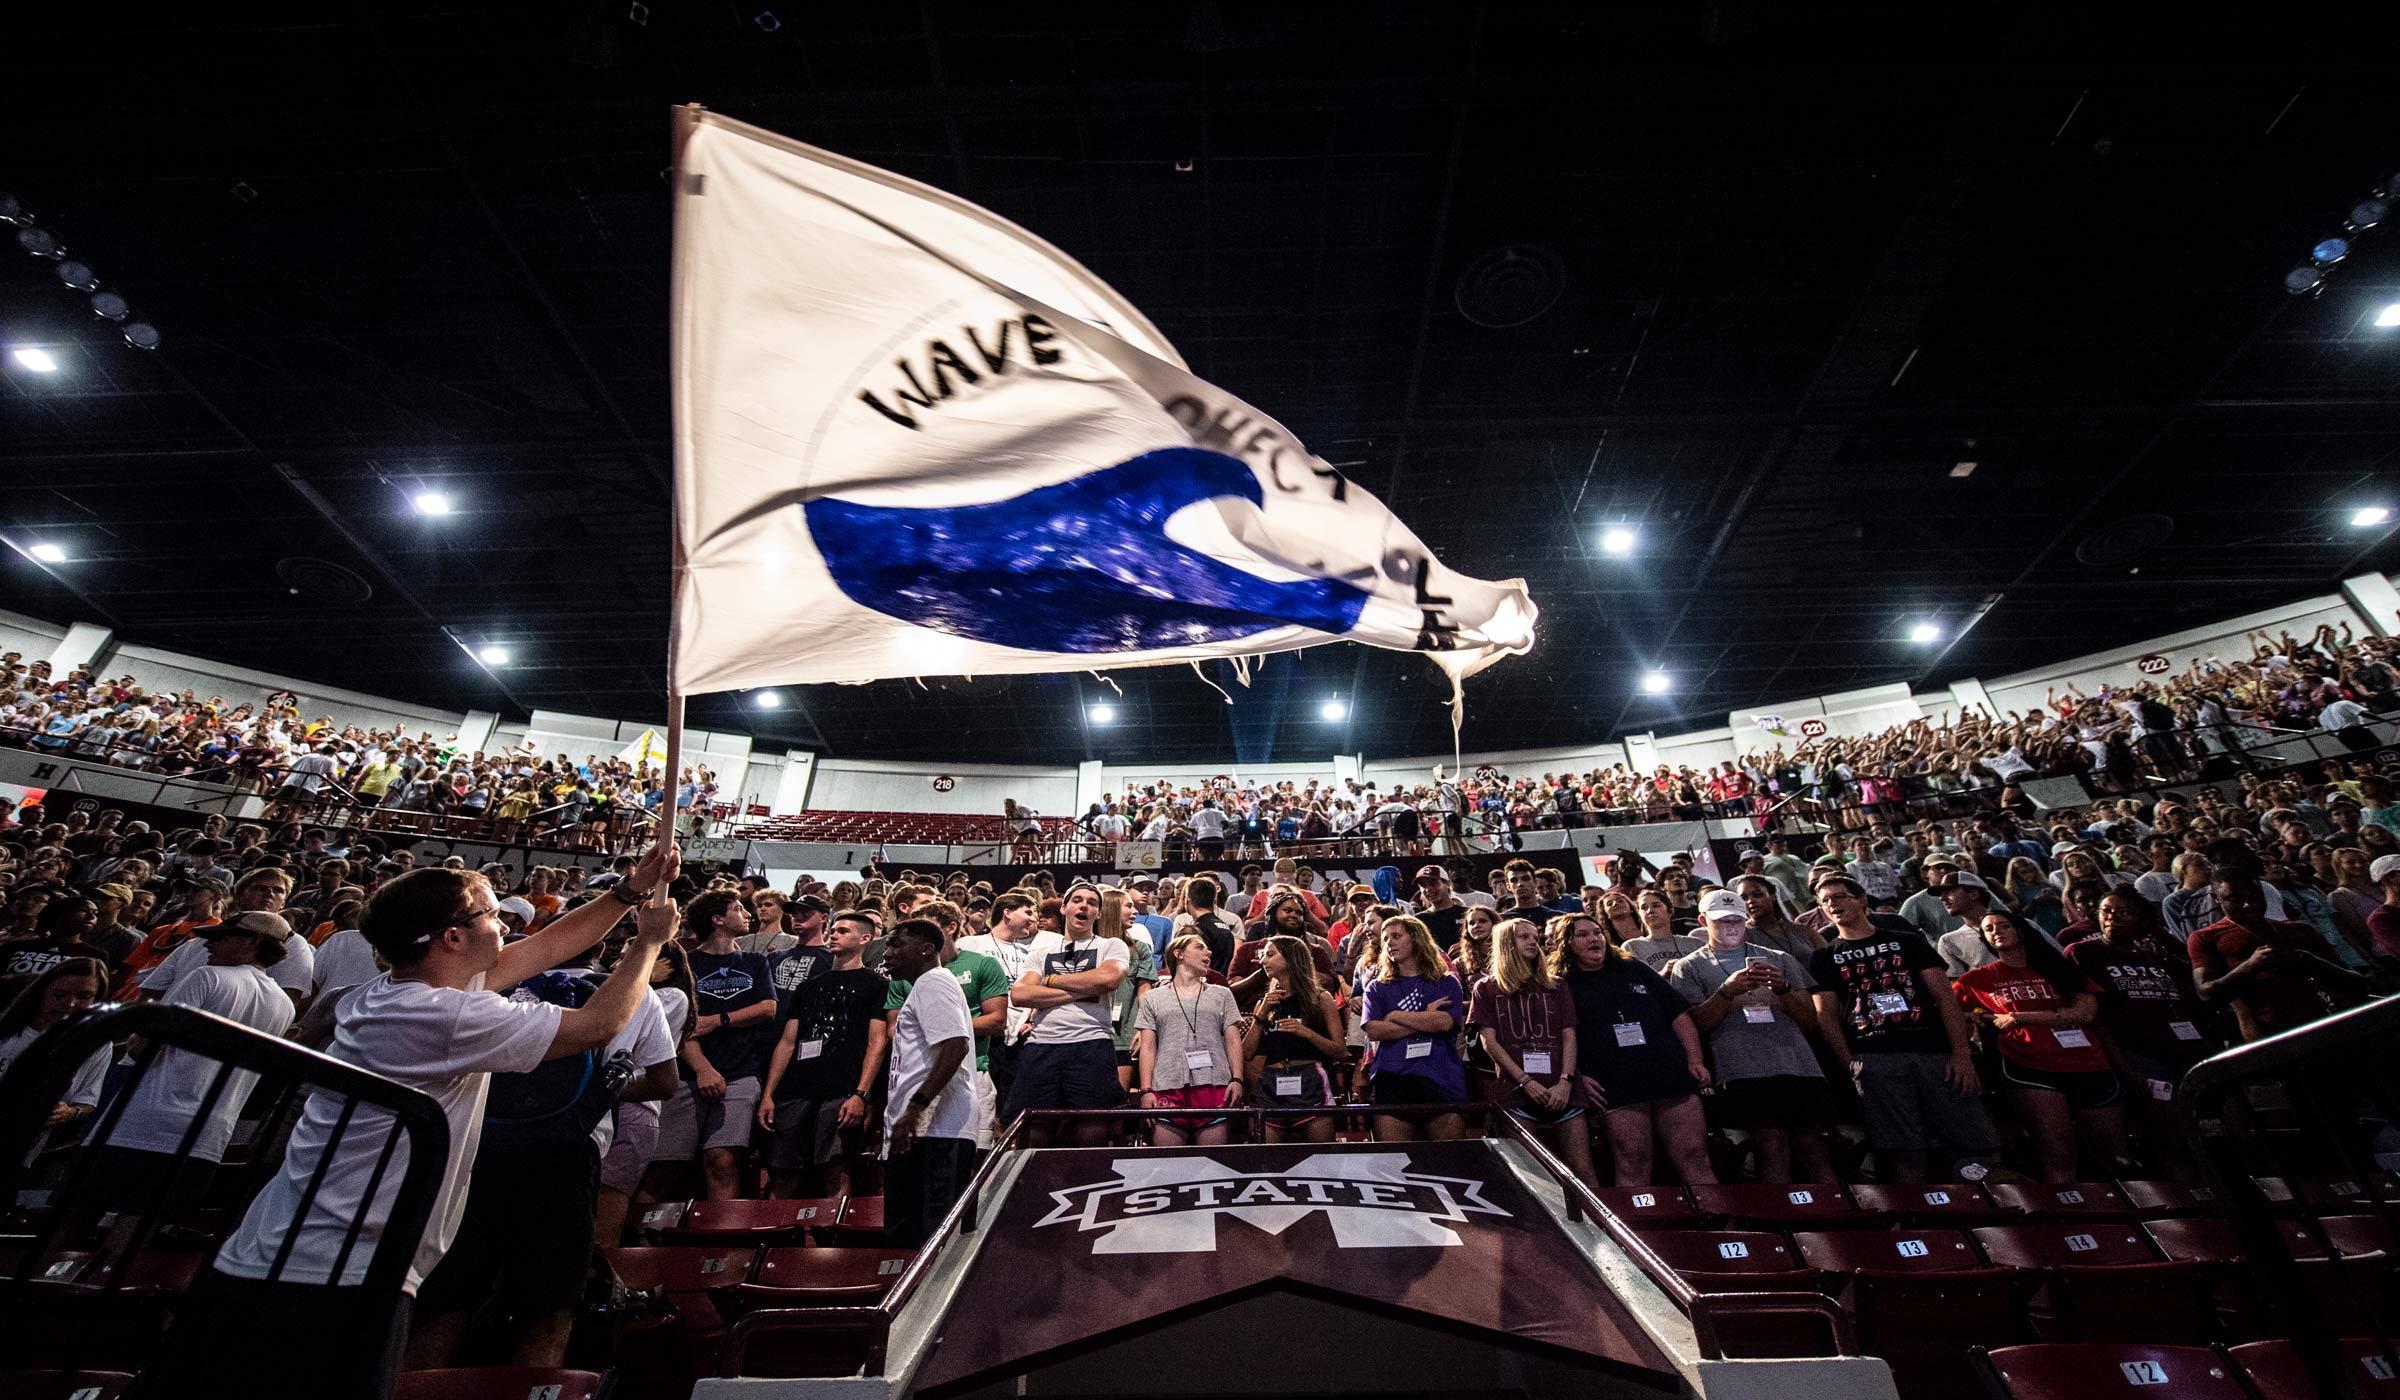 A flag representing a New Maroon Camp team is waved at the Hump during the welcome ceremony of the camp.